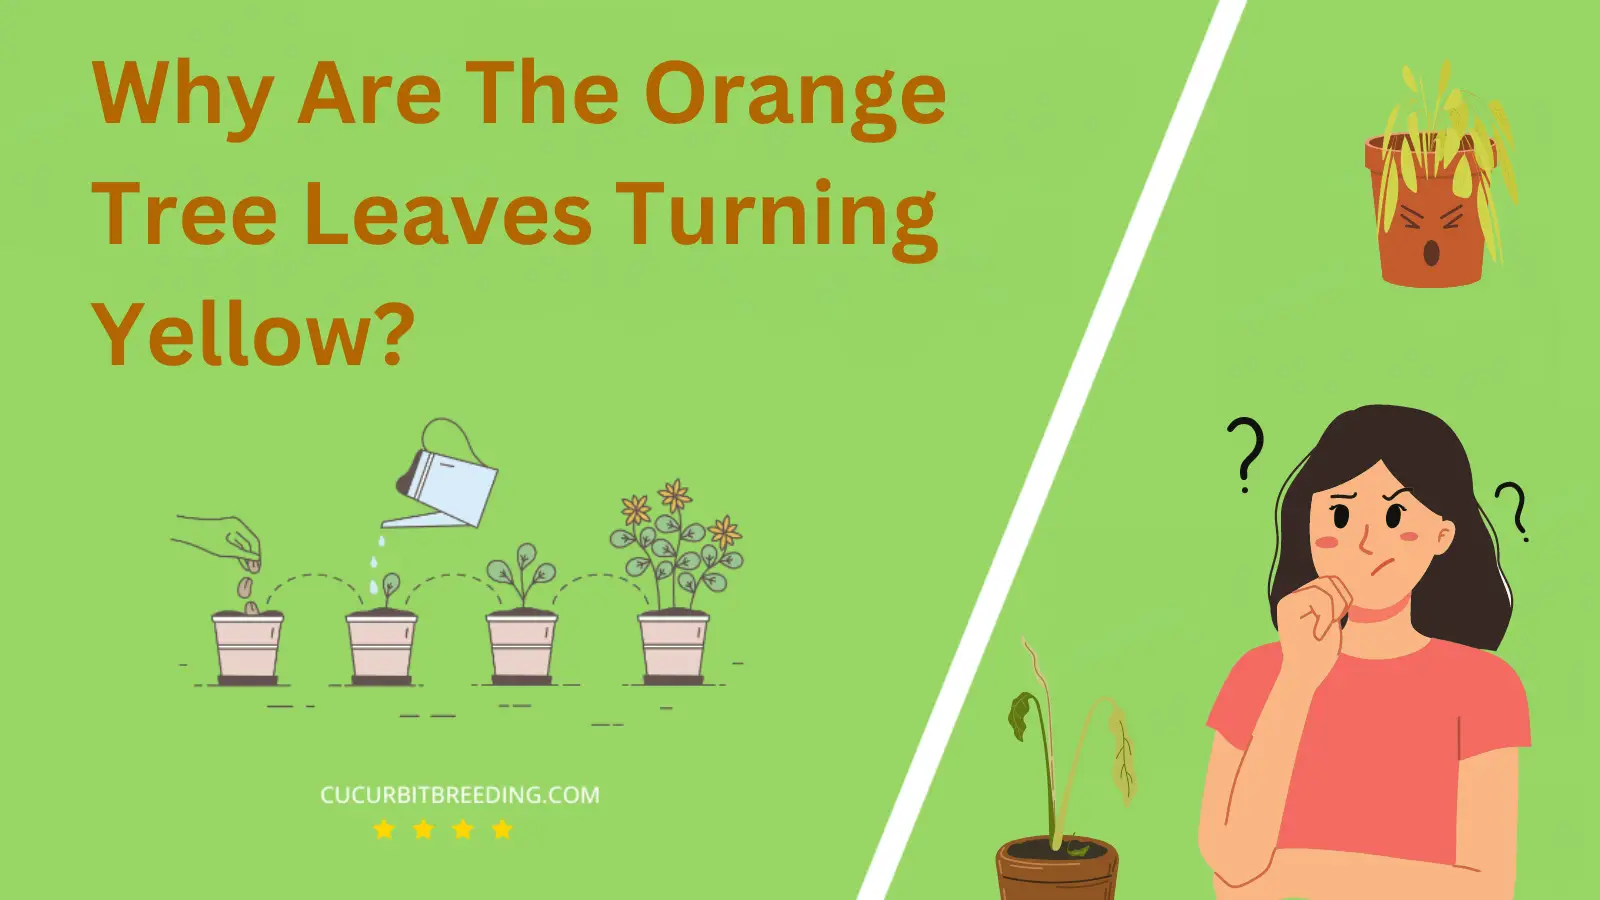 Why Are The Orange Tree Leaves Turning Yellow